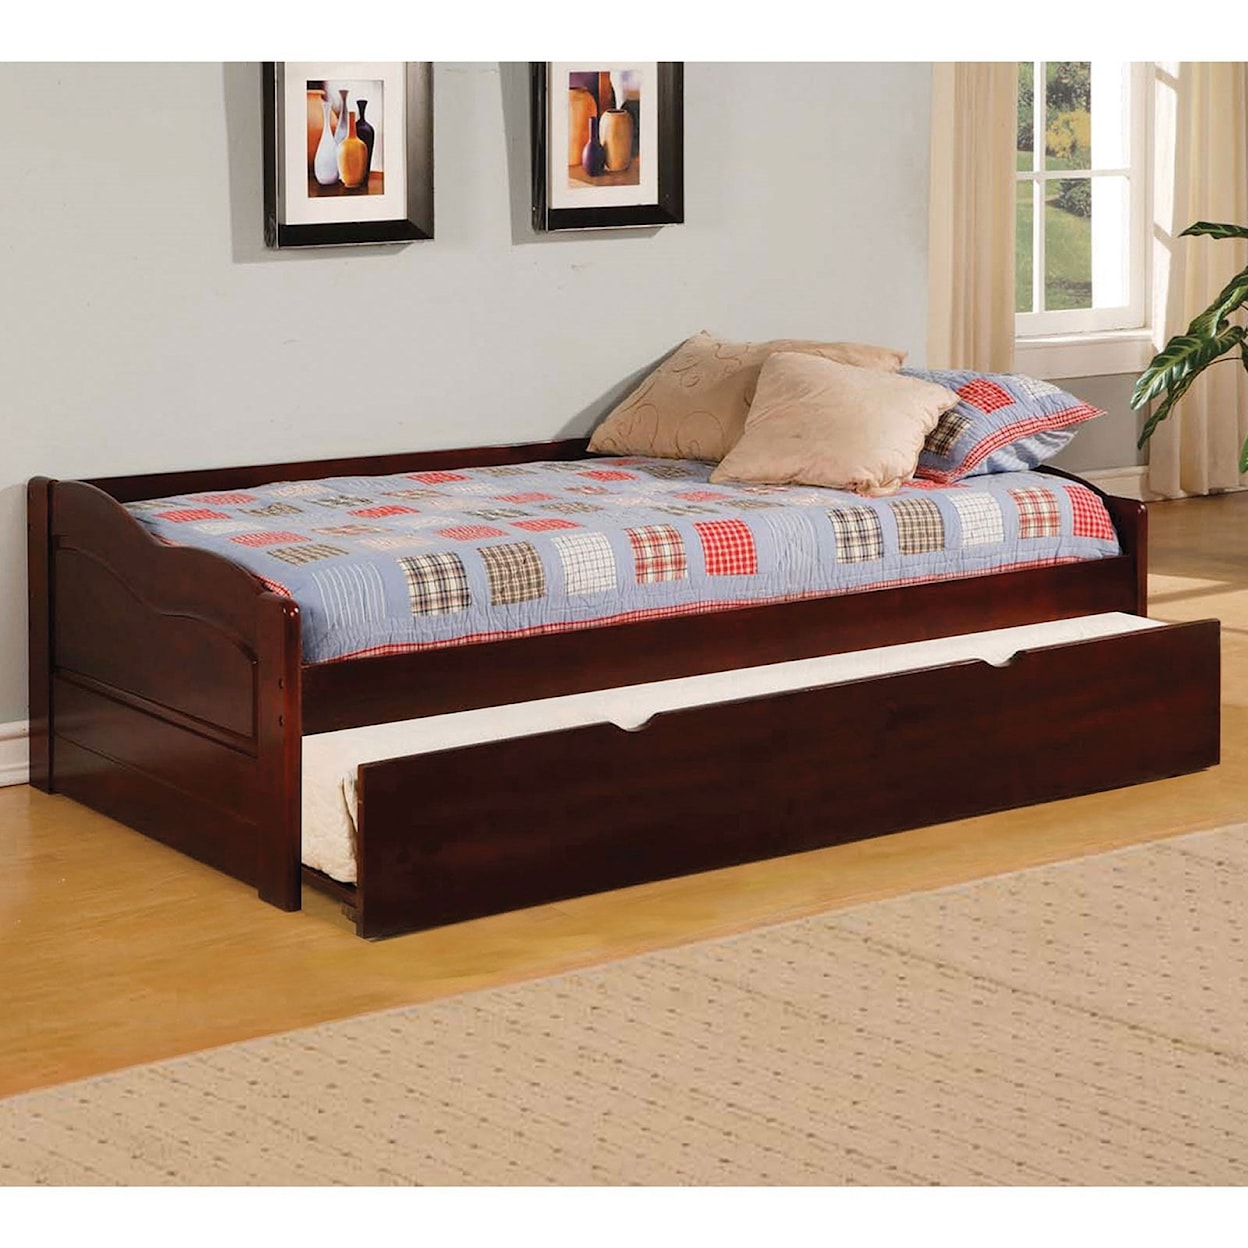 FUSA Sunset Daybed with Trundle